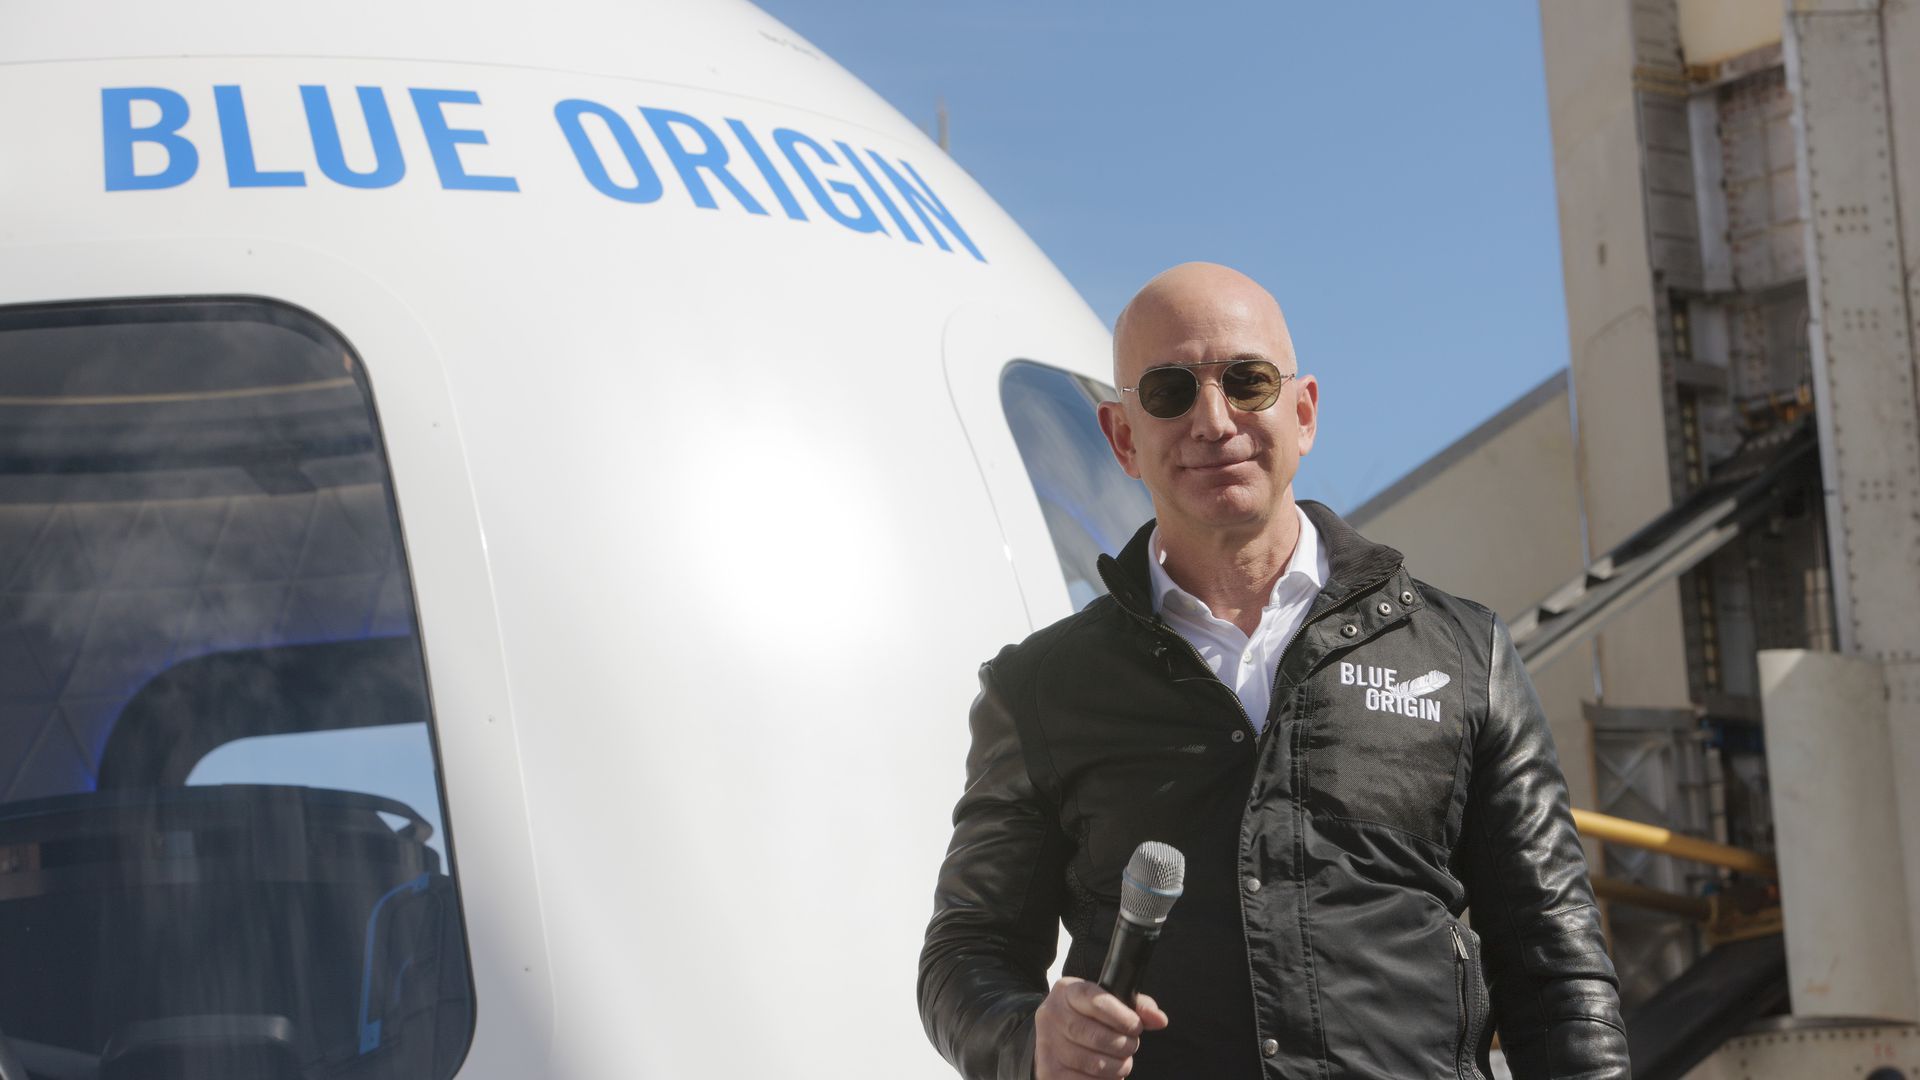 Photo of Jeff Bezos standing in front of a large vehicle with the words "Blue Origin" on it